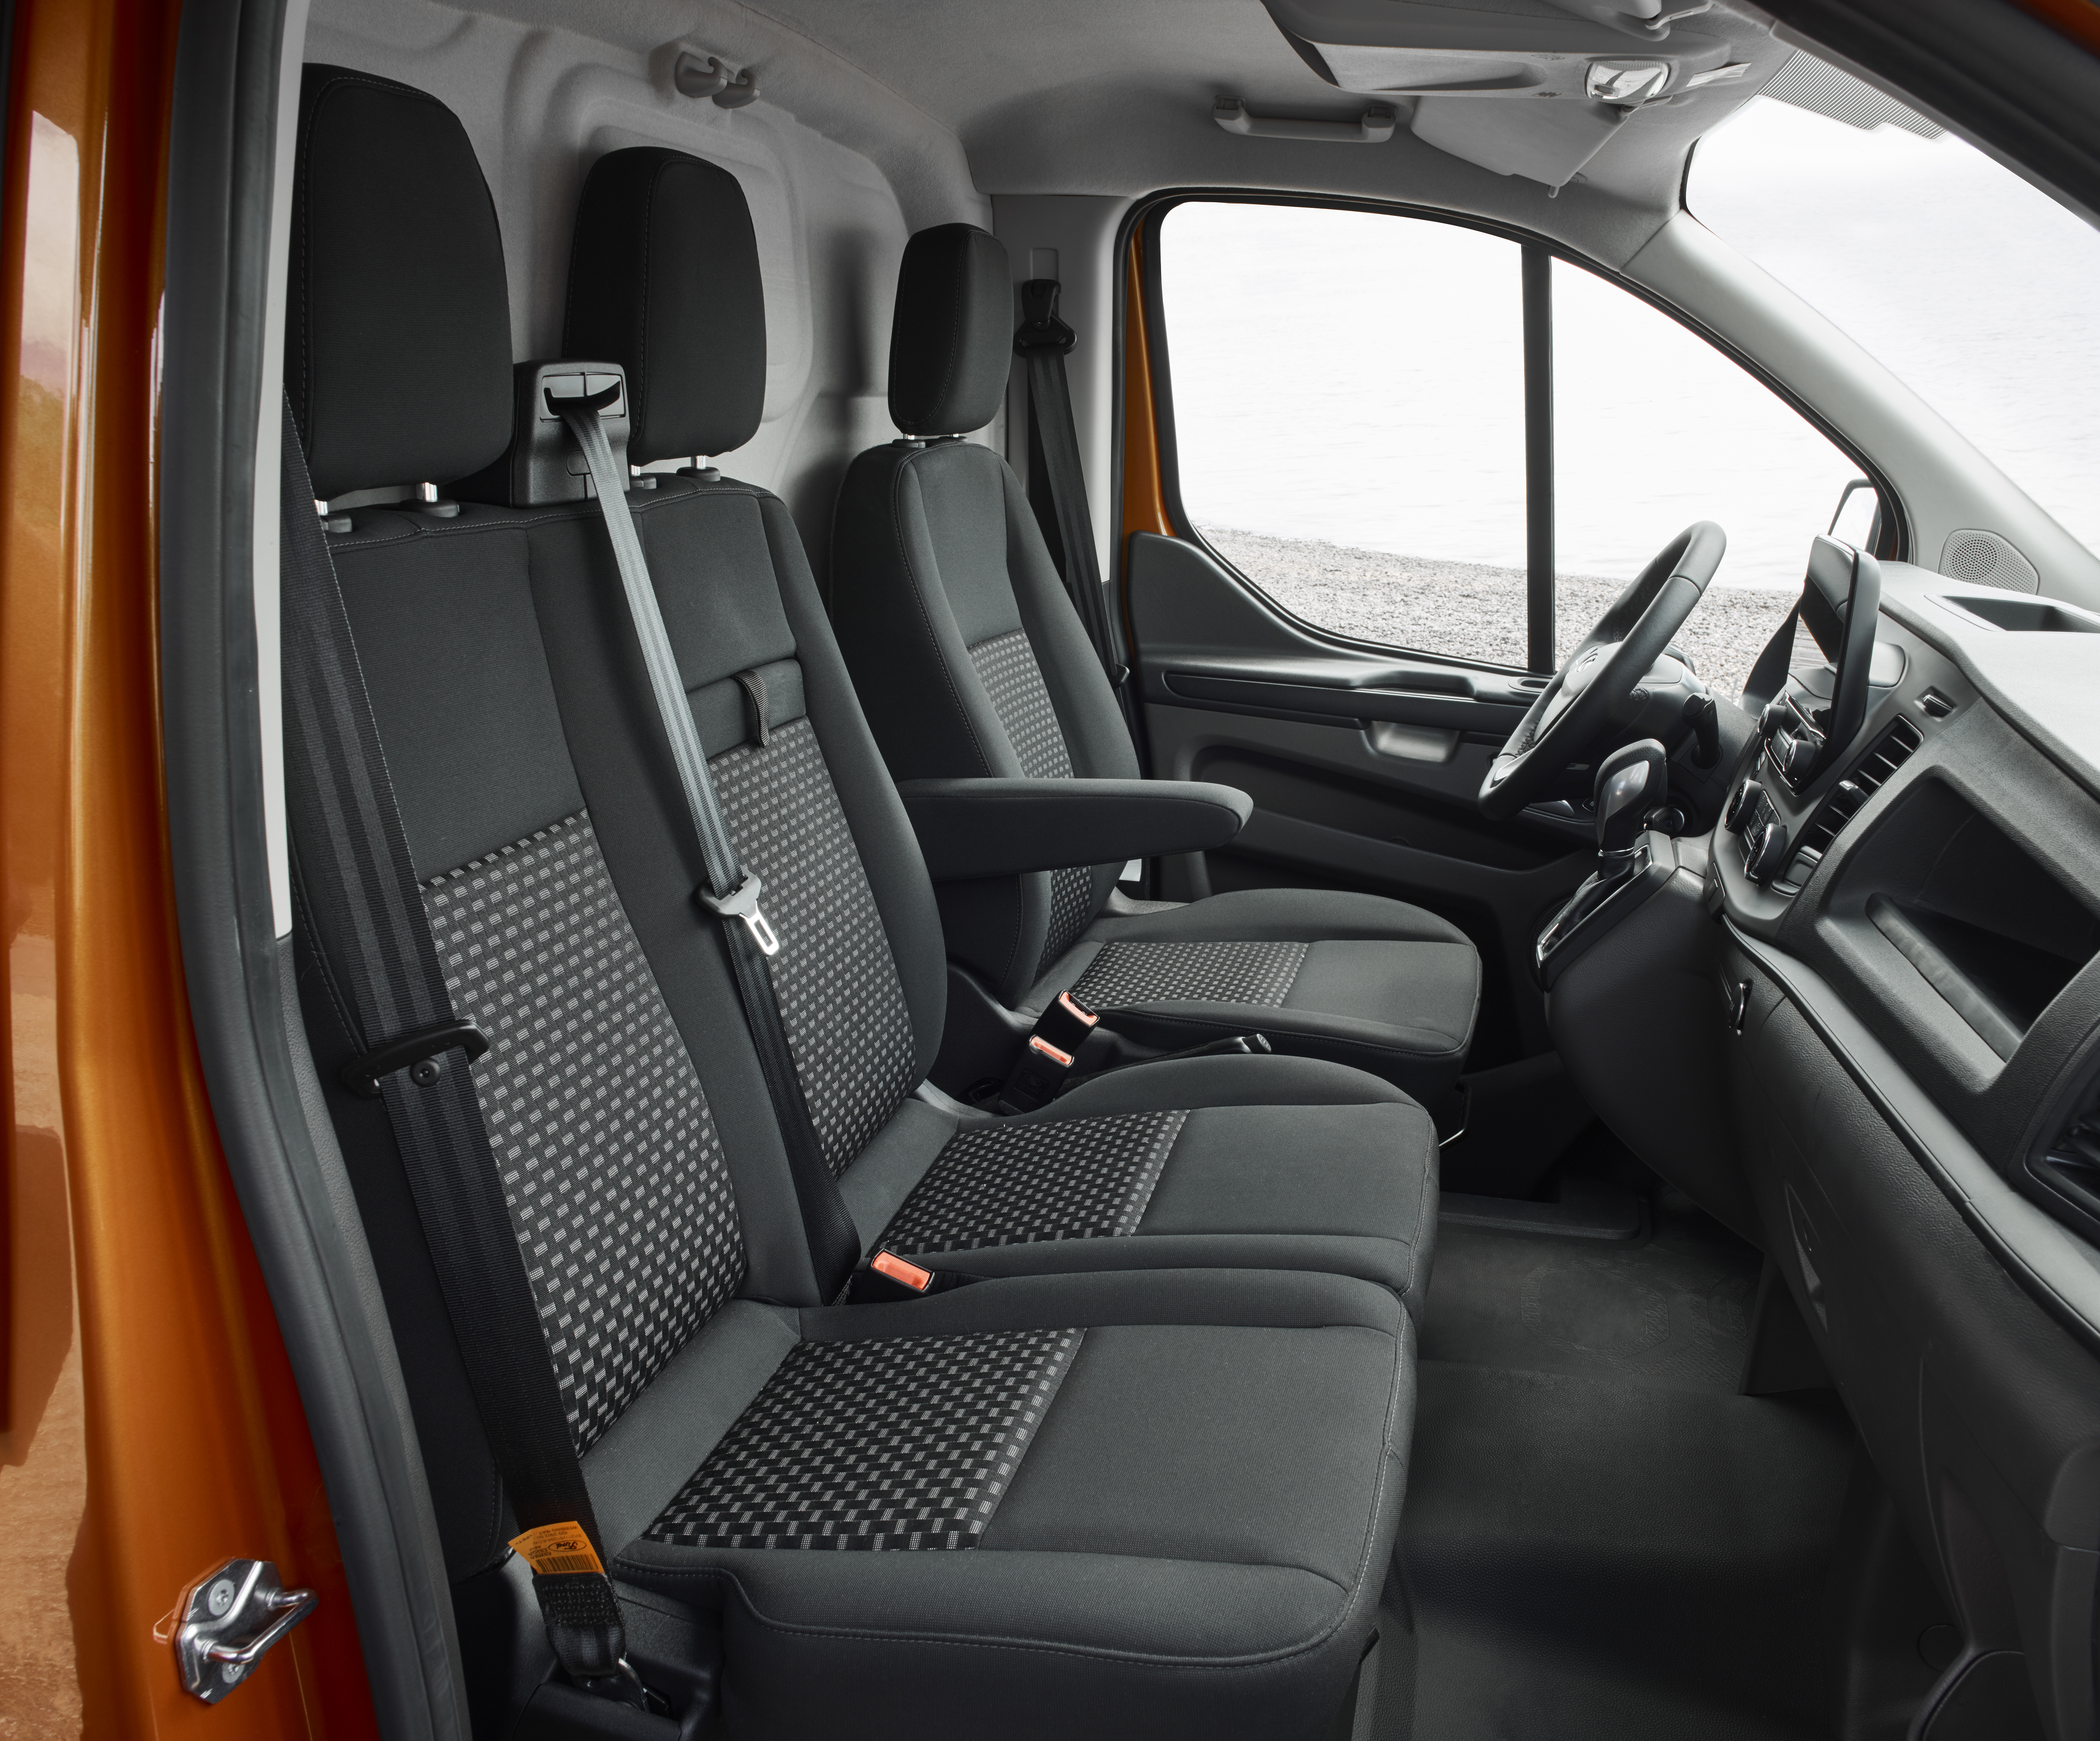 Ford Transit Connect accessories specifications